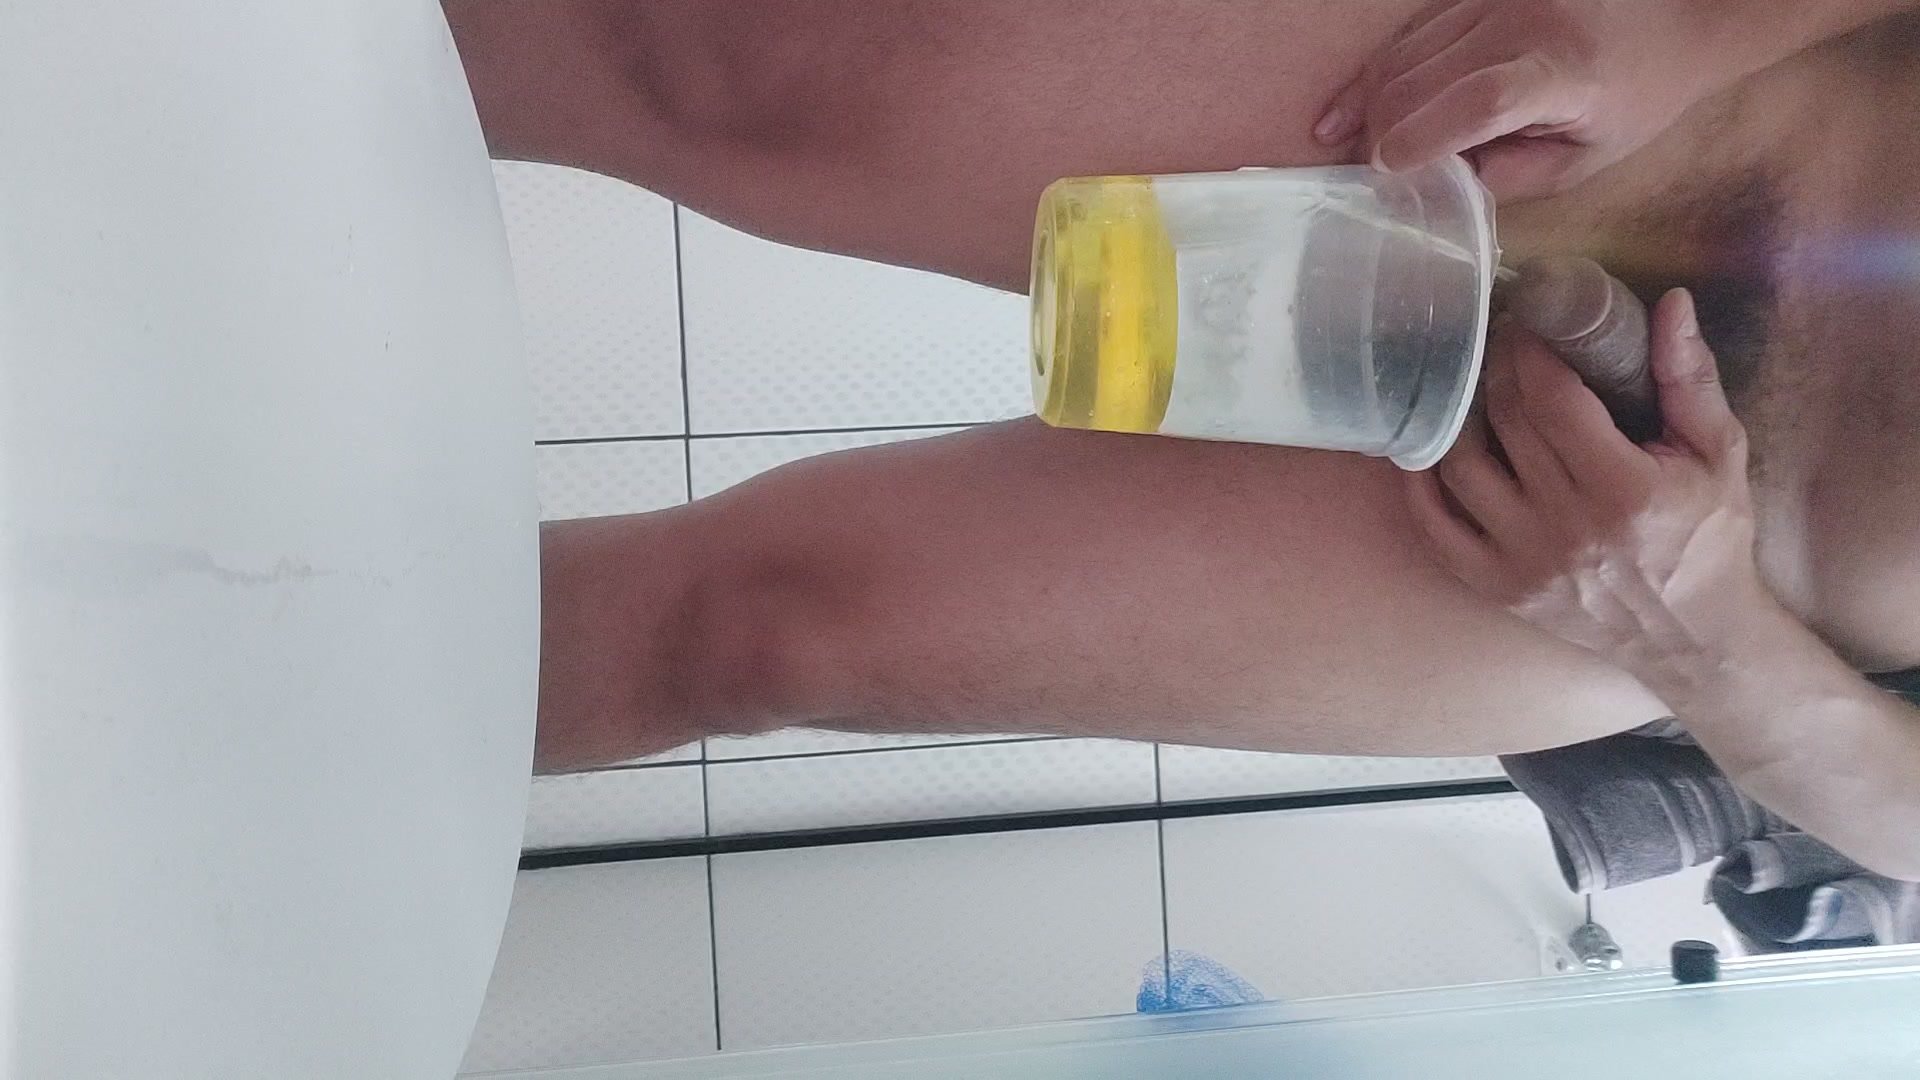 Pissing in the cup - video 3